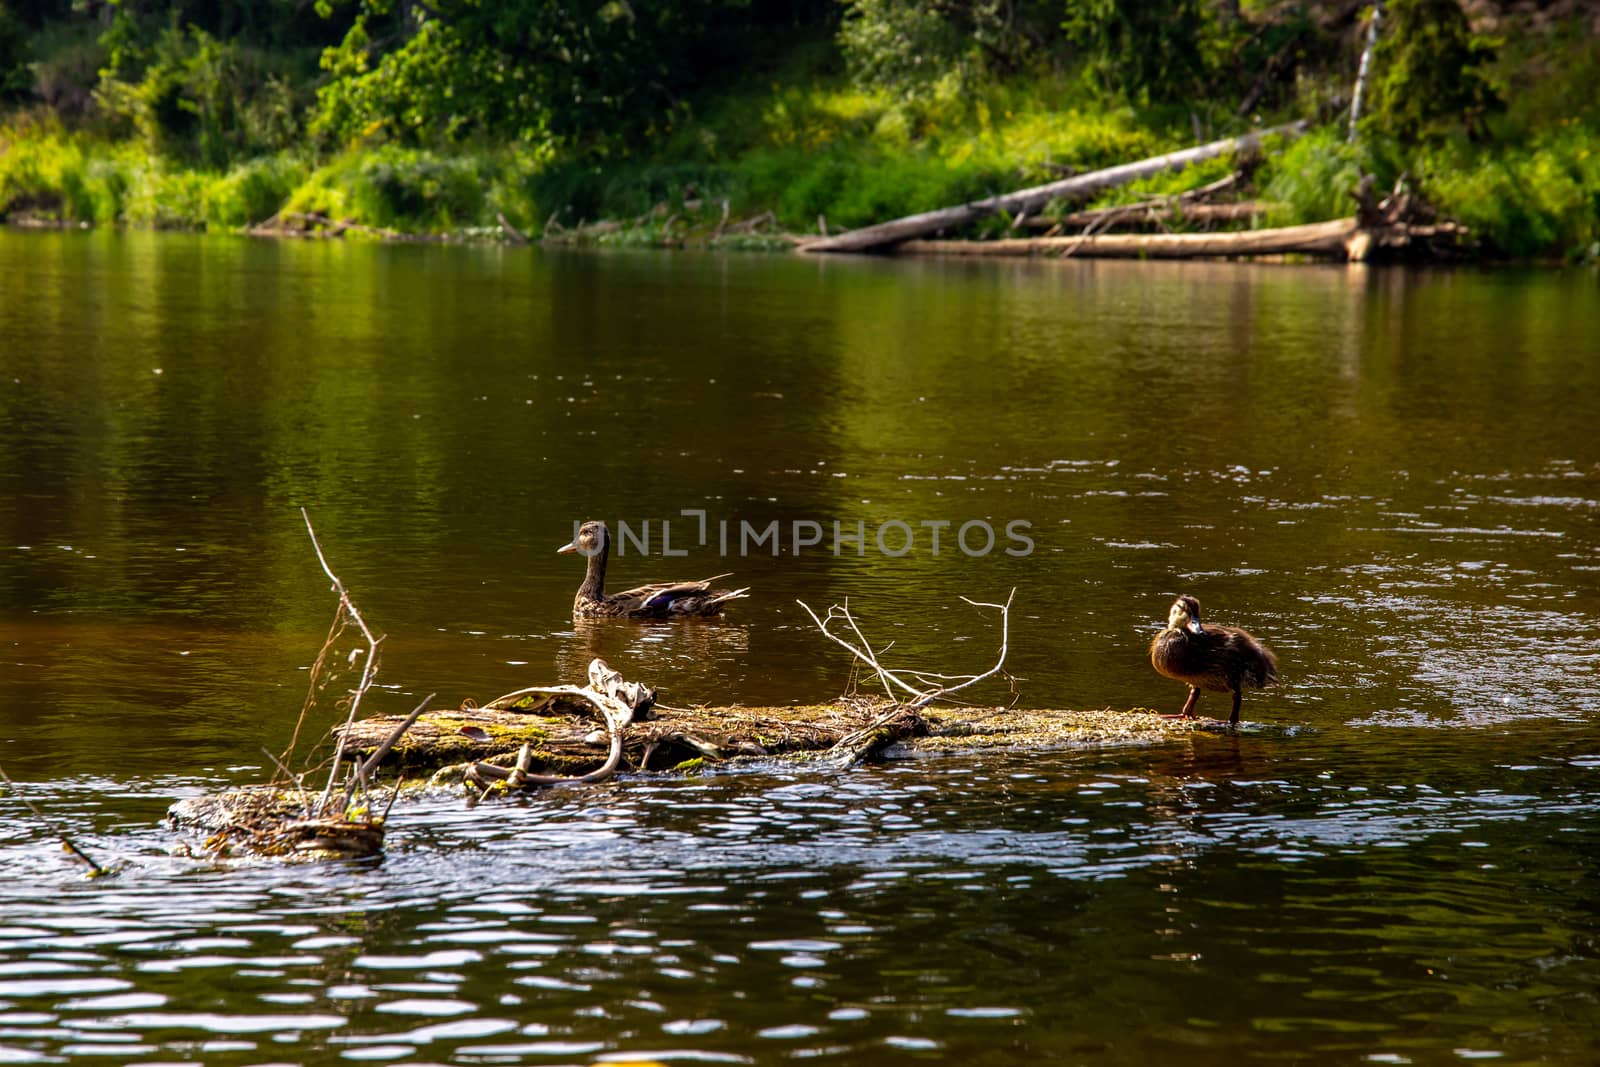 Ducks swimming in the river Gauja. Ducks on the wooden log in the middle of the river Gauja in Latvia. Duck is a waterbird with a broad blunt bill, short legs, webbed feet, and a waddling gait.